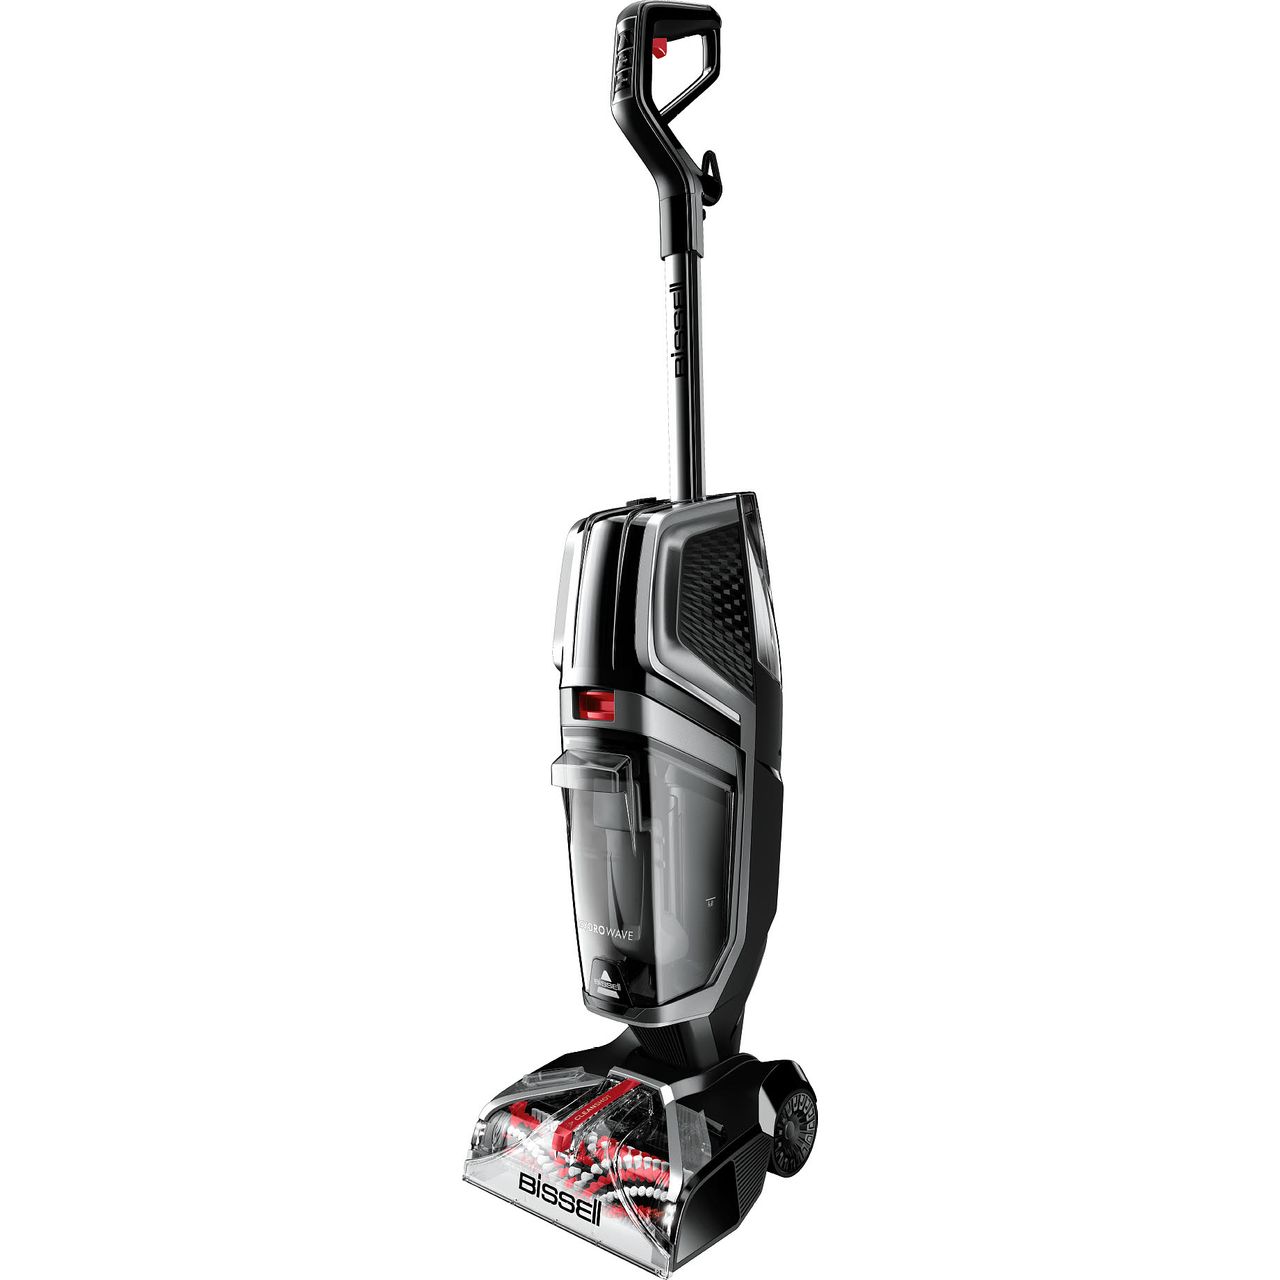 Bissell Compact HydroWave 2571E Carpet Cleaner Review